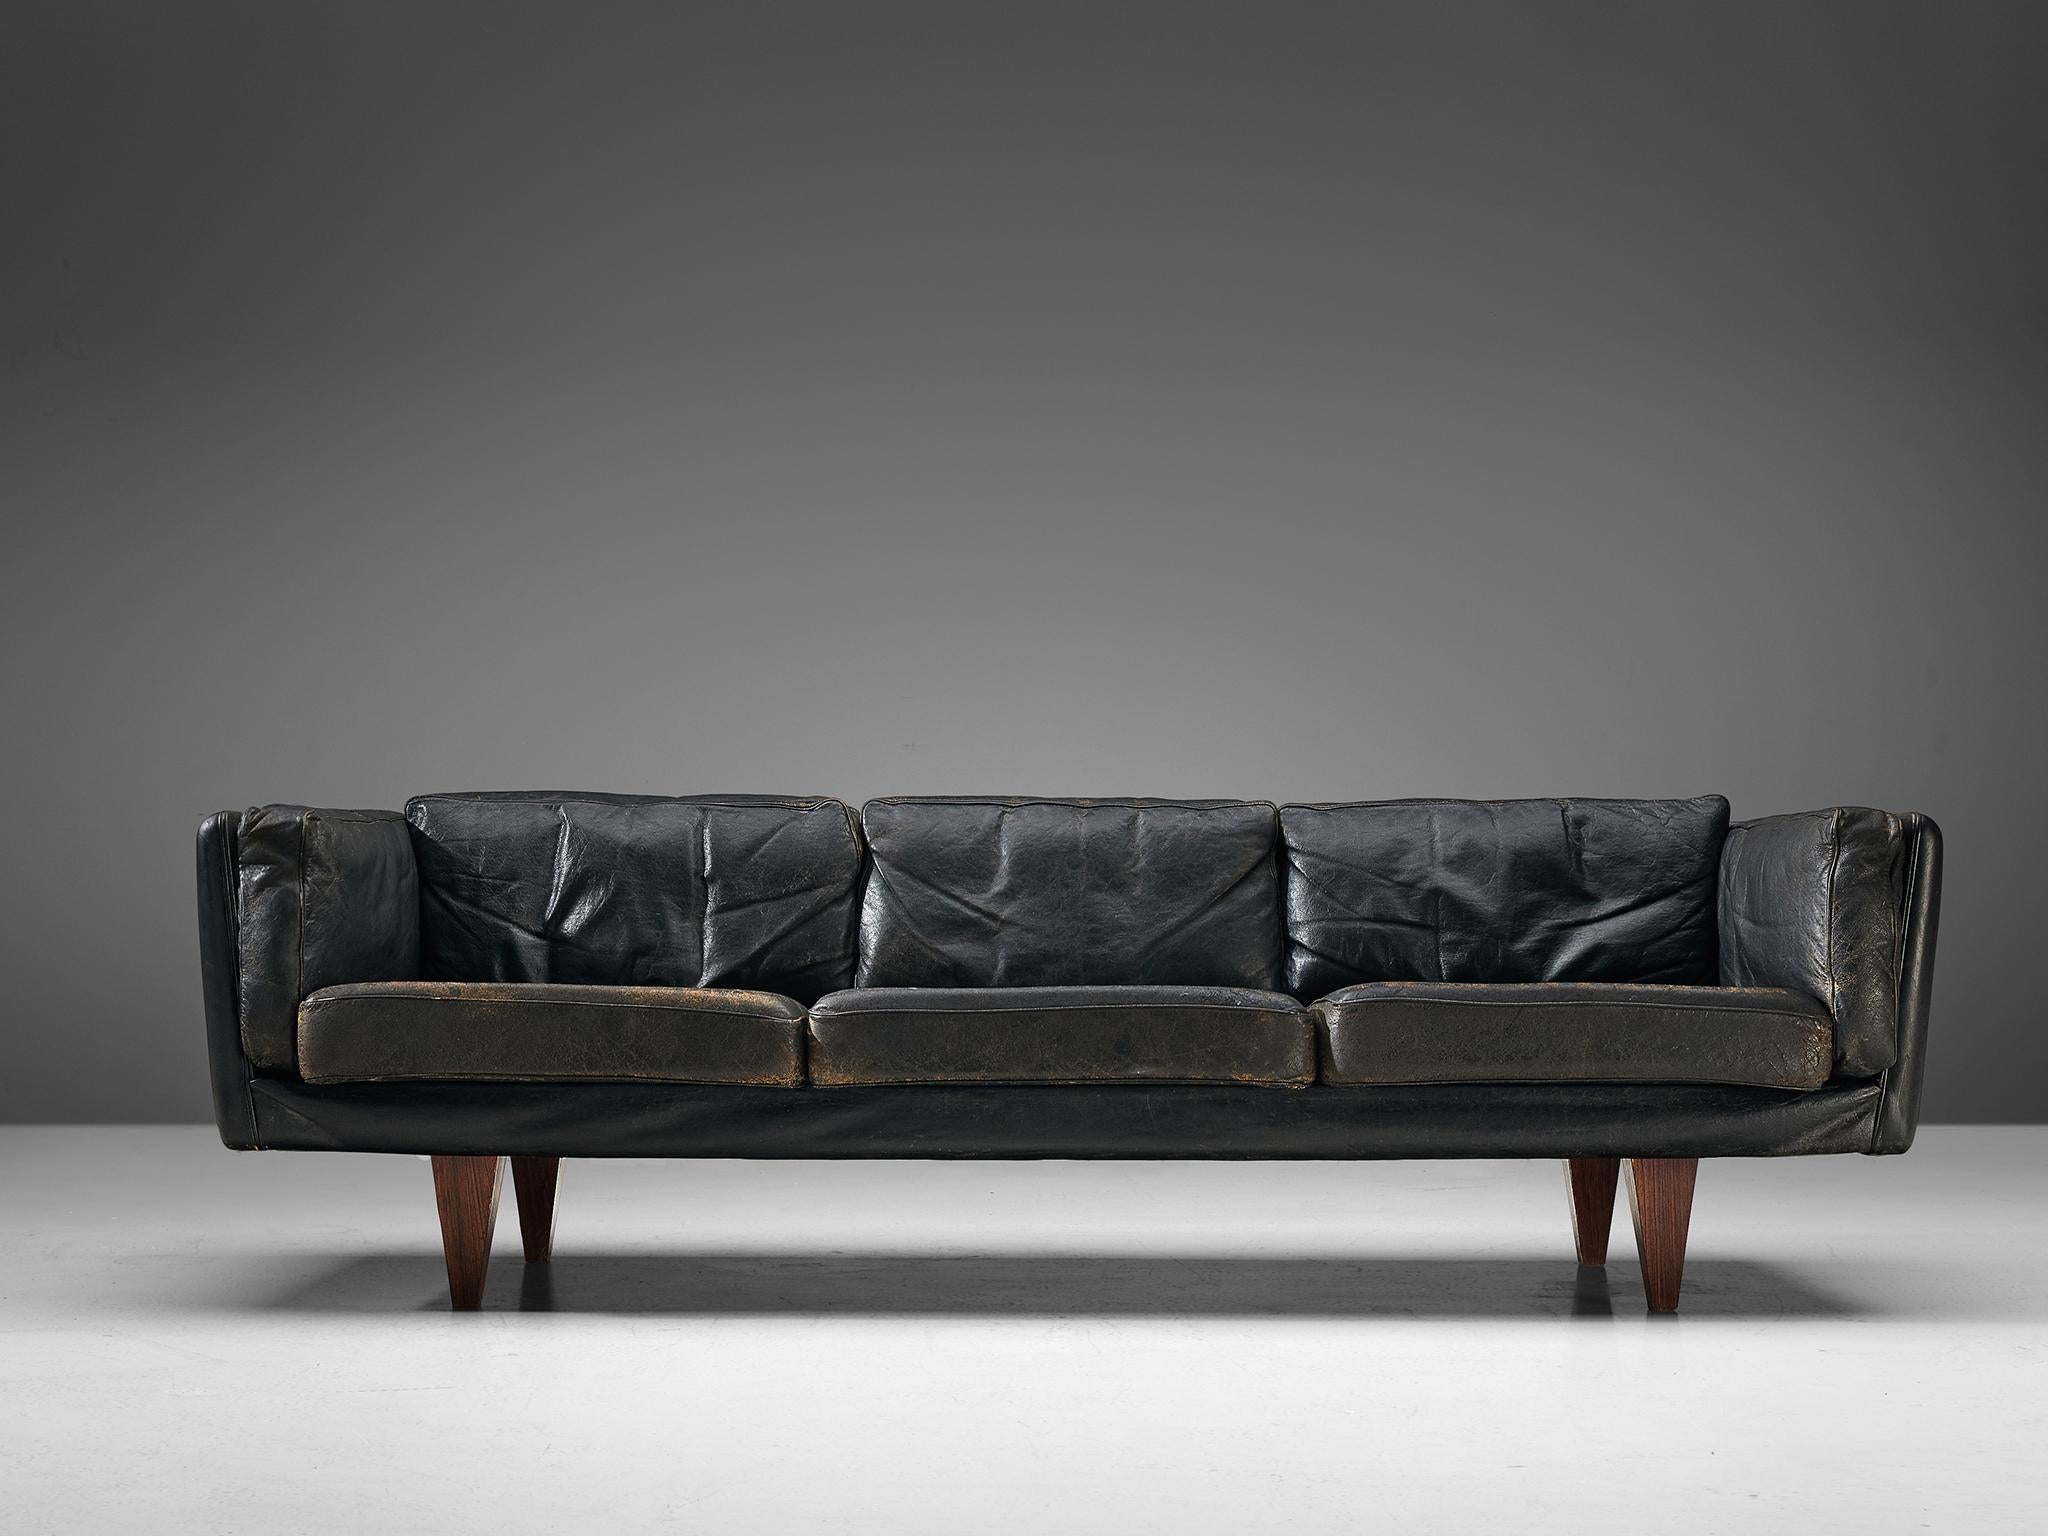 Illum Wikkelsø, sofa model 'V11' in leather and Brazilian hardwood, Denmark, 1960s.

Stunningly three-seat sofa, designed by Danish designer Illum Wikkelsø. Highly comfortable and beautiful designed sofa with original leather upholstery. The deep